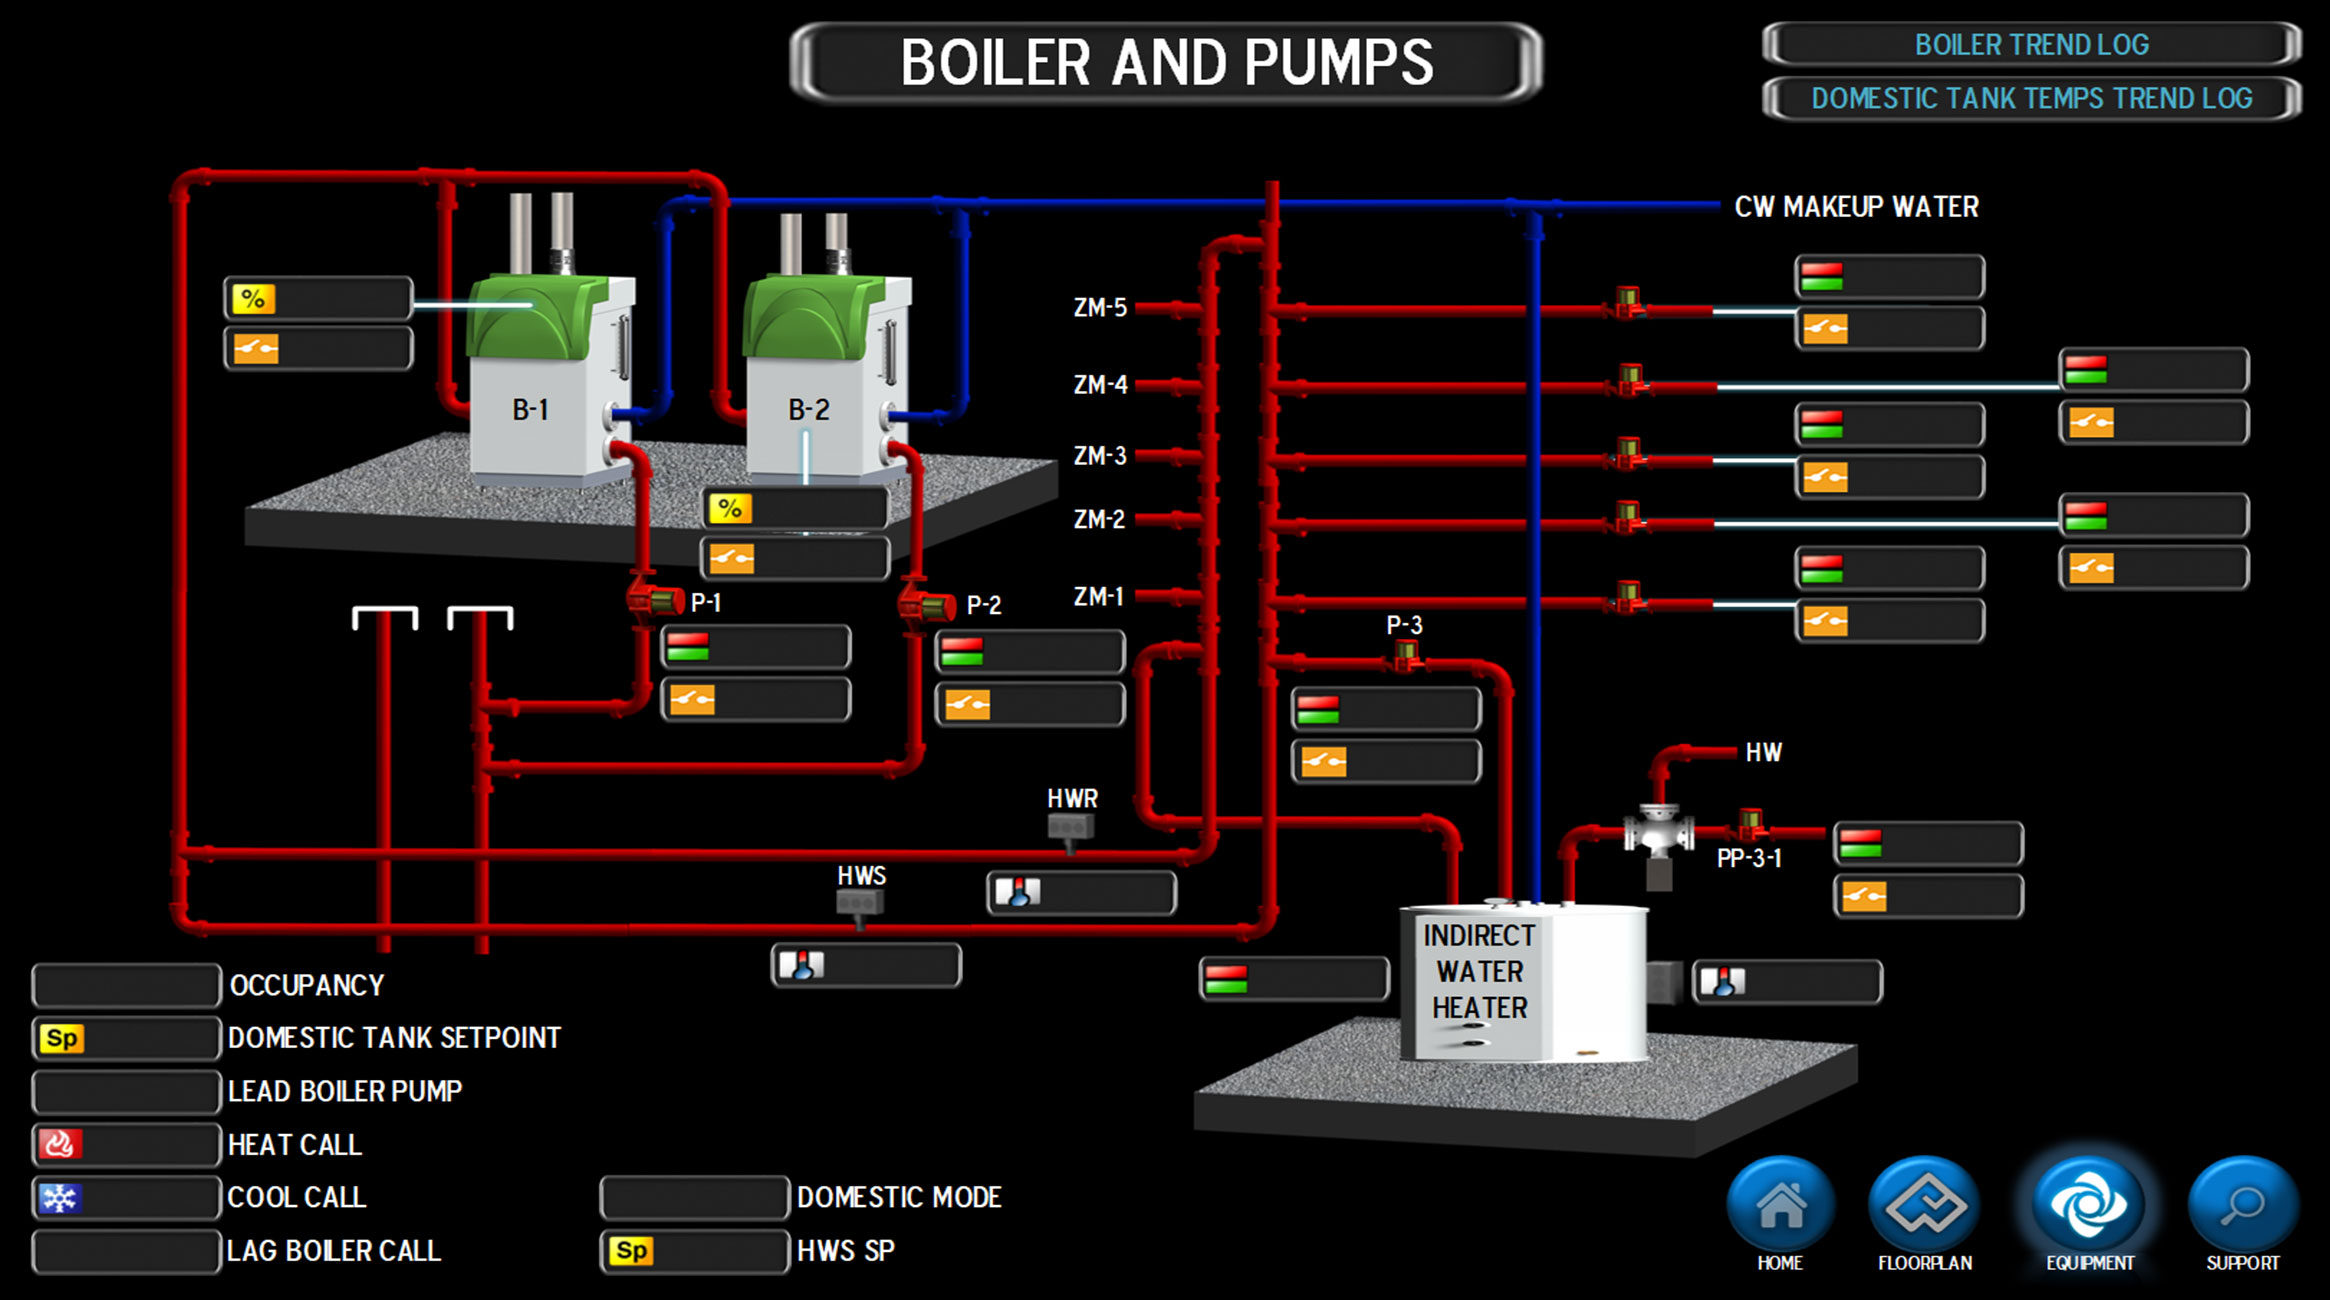 Boiler and Pumps infographic